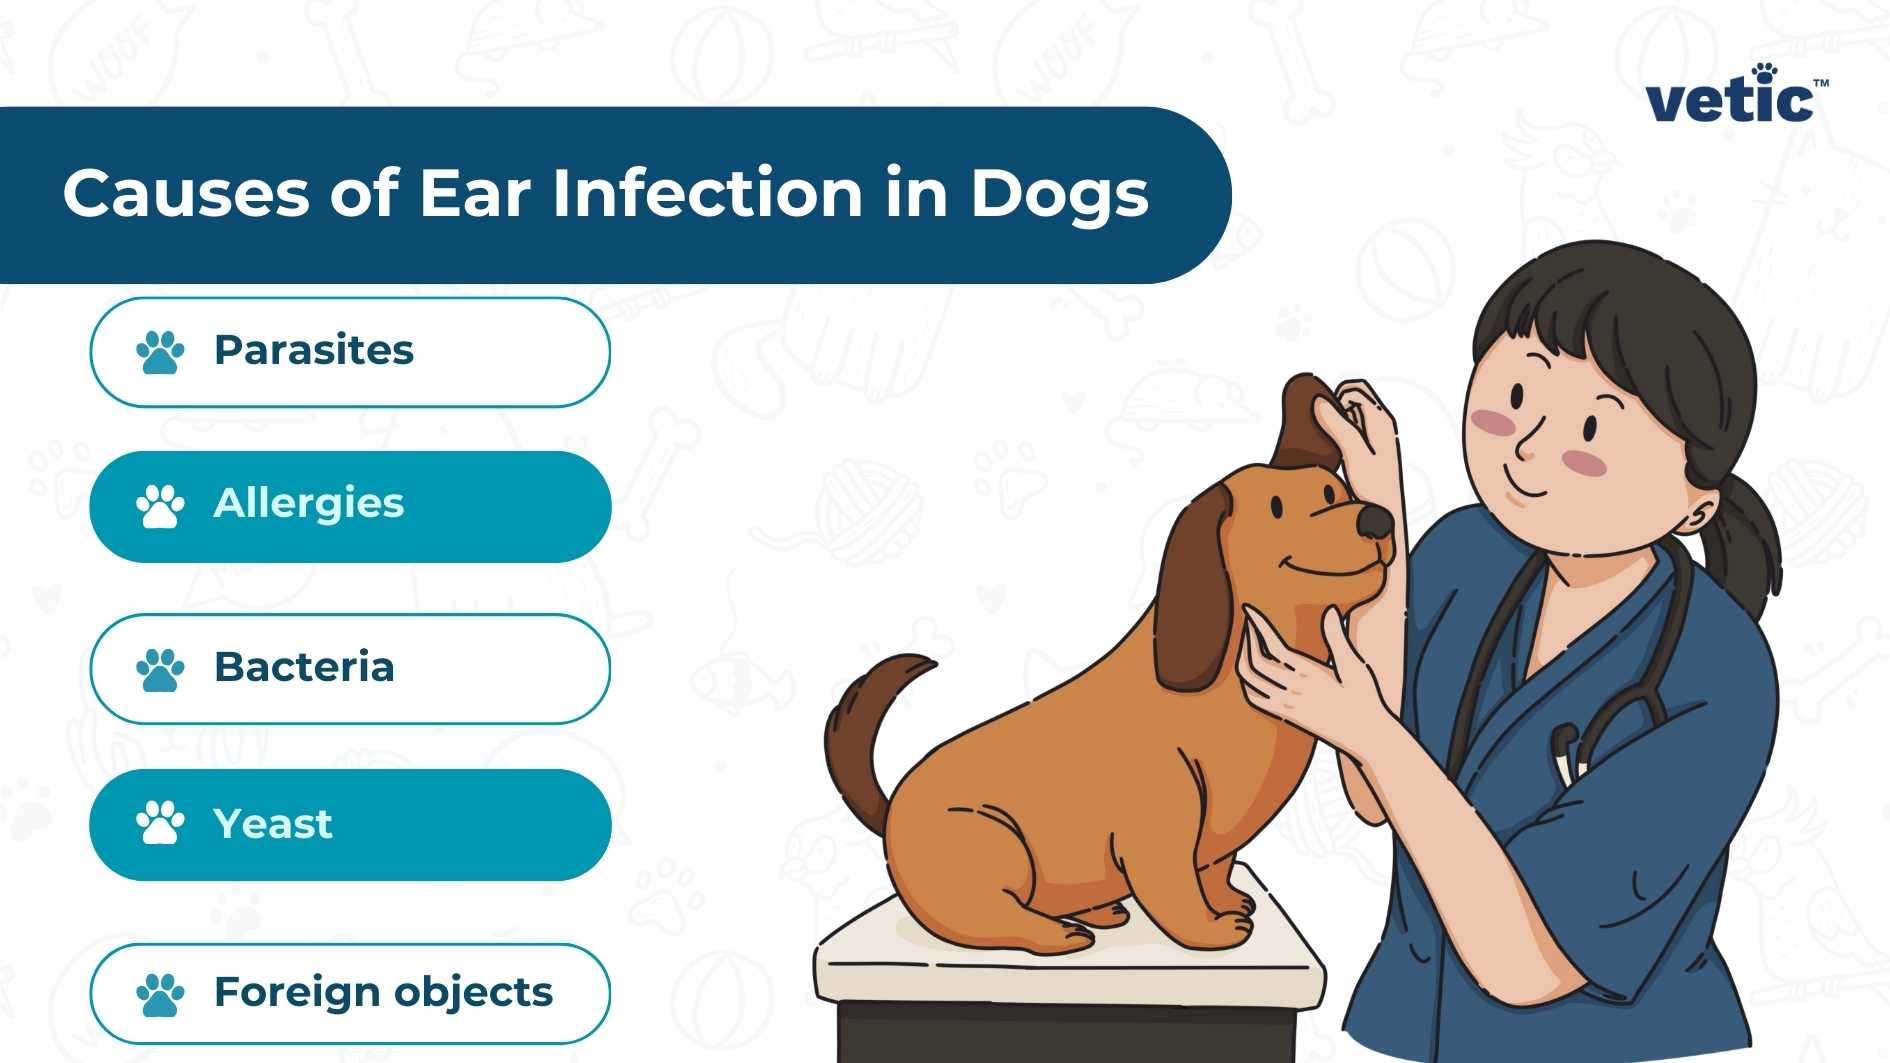 Causes of Ear Infection in Dogs” with a list of causes and an illustration of a vet examining a dog. The image by vetic serves as an educational resource outlining the common causes of ear infections in dogs. It features a clear, easy-to-read list including parasites, allergies, bacteria, yeast, and foreign objects alongside an engaging illustration of a vet gently examining a dog’s ear.